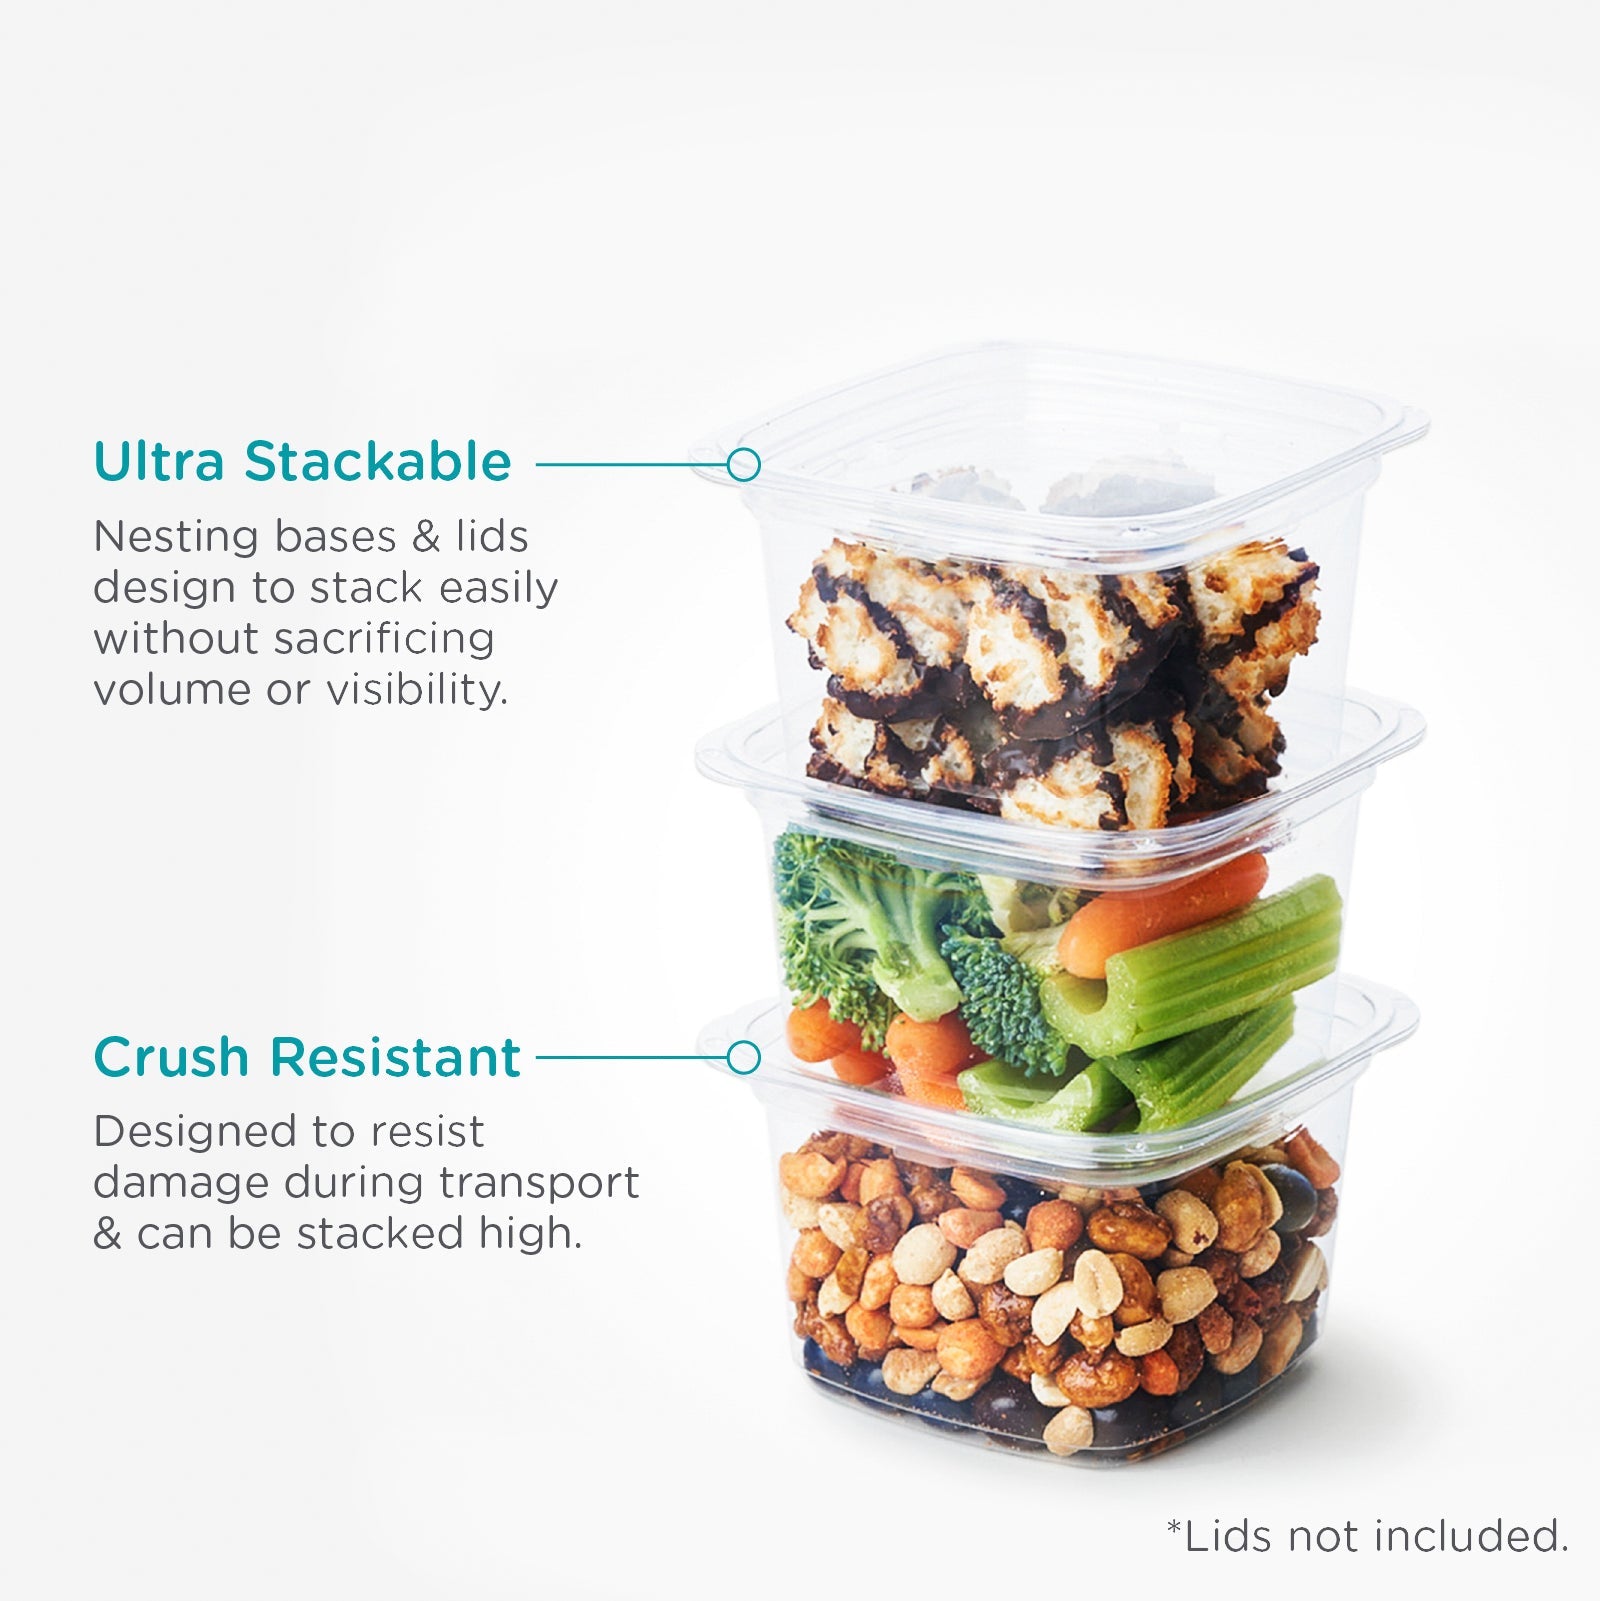 Essential Everyday Reusable Containers, Divided Entree, 24 Fluid Ounce, Food Storage